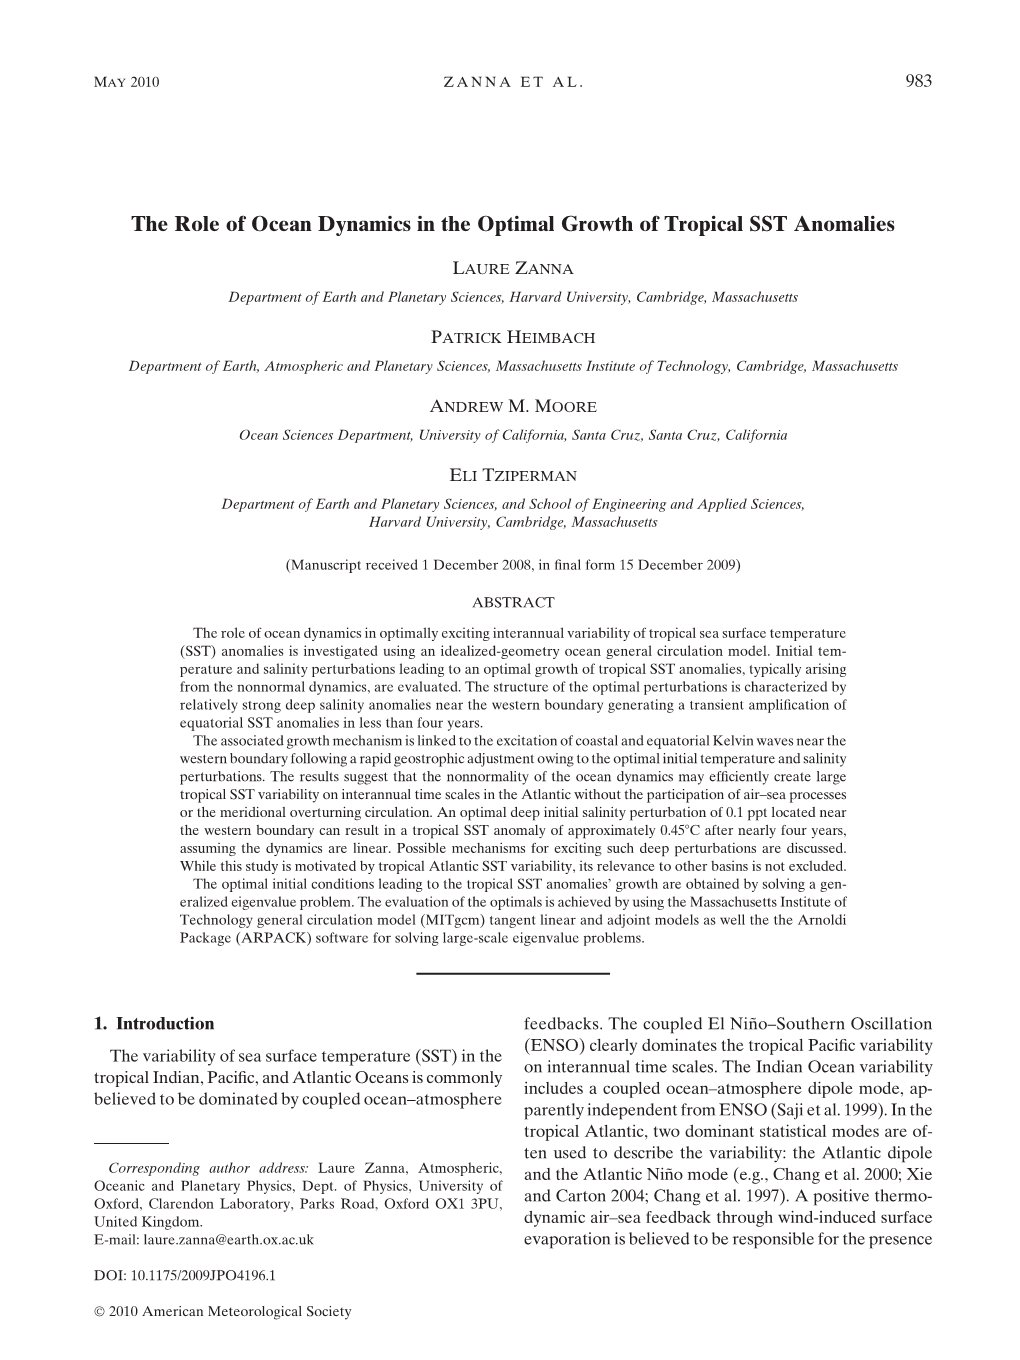 The Role of Ocean Dynamics in the Optimal Growth of Tropical SST Anomalies